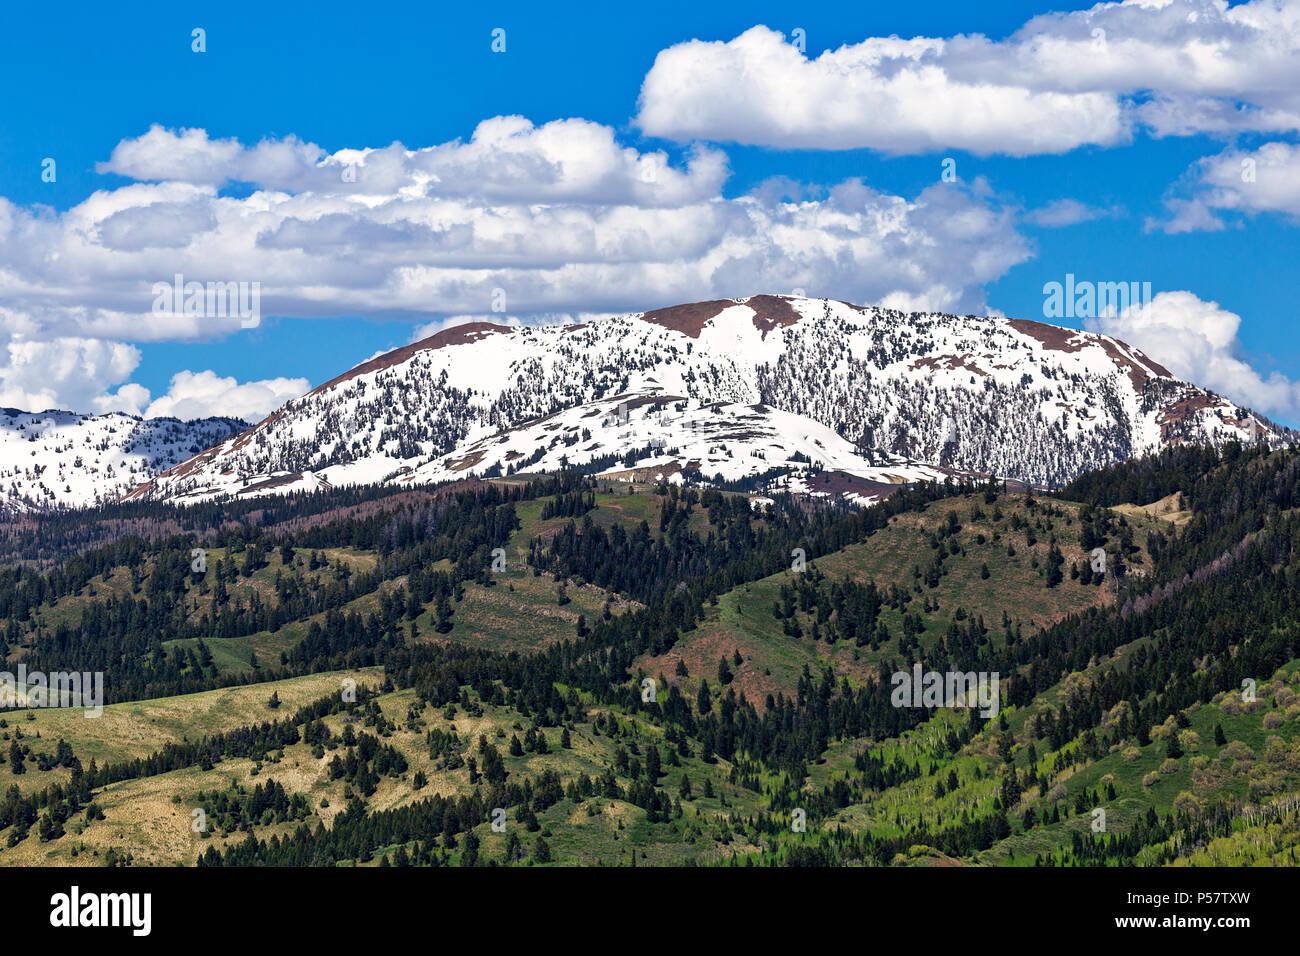 Snow capped mountains of the Salt River Range in Bridger Teton National Forest from Salt River Pass, Wyoming, USA Stock Photo